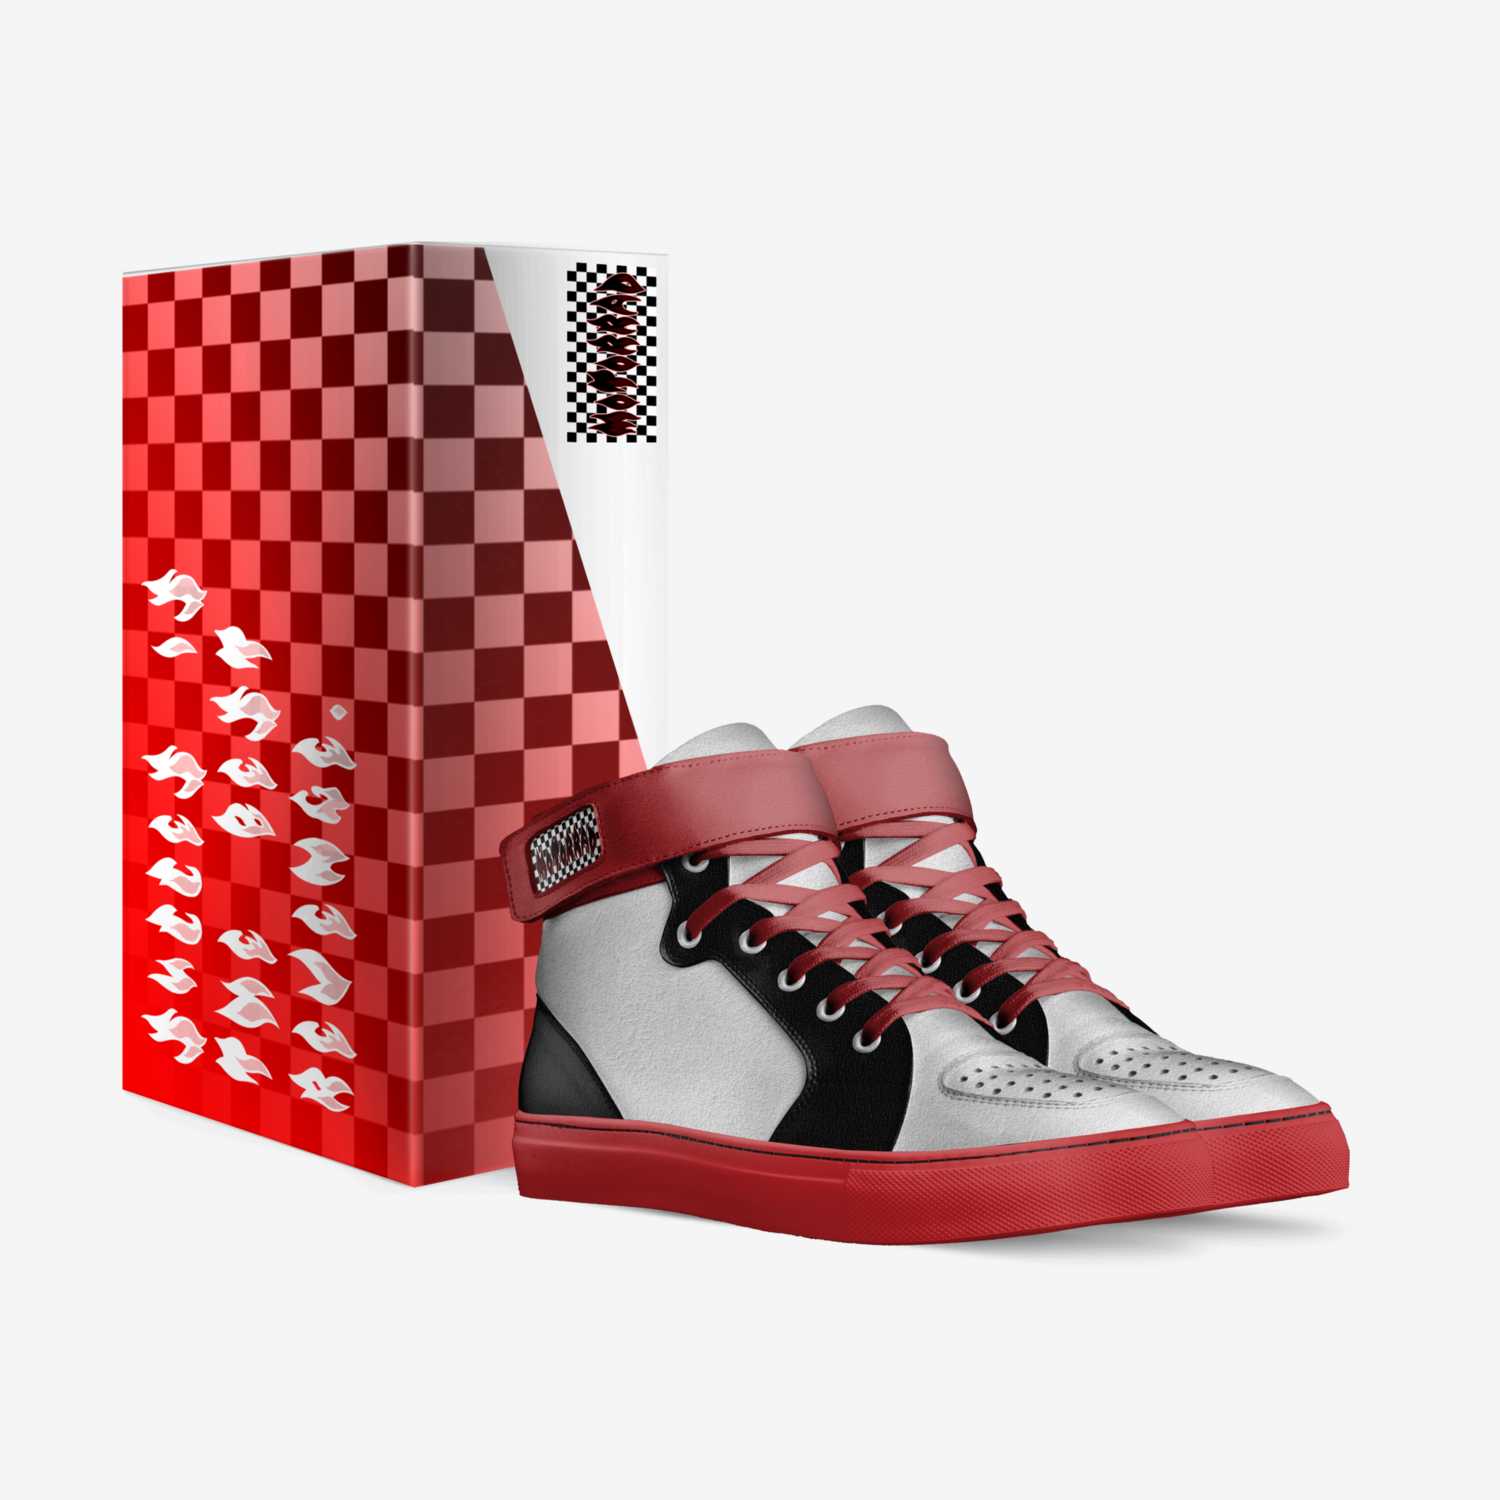 MOTORRAD custom made in Italy shoes by Carloslnrsss | Box view